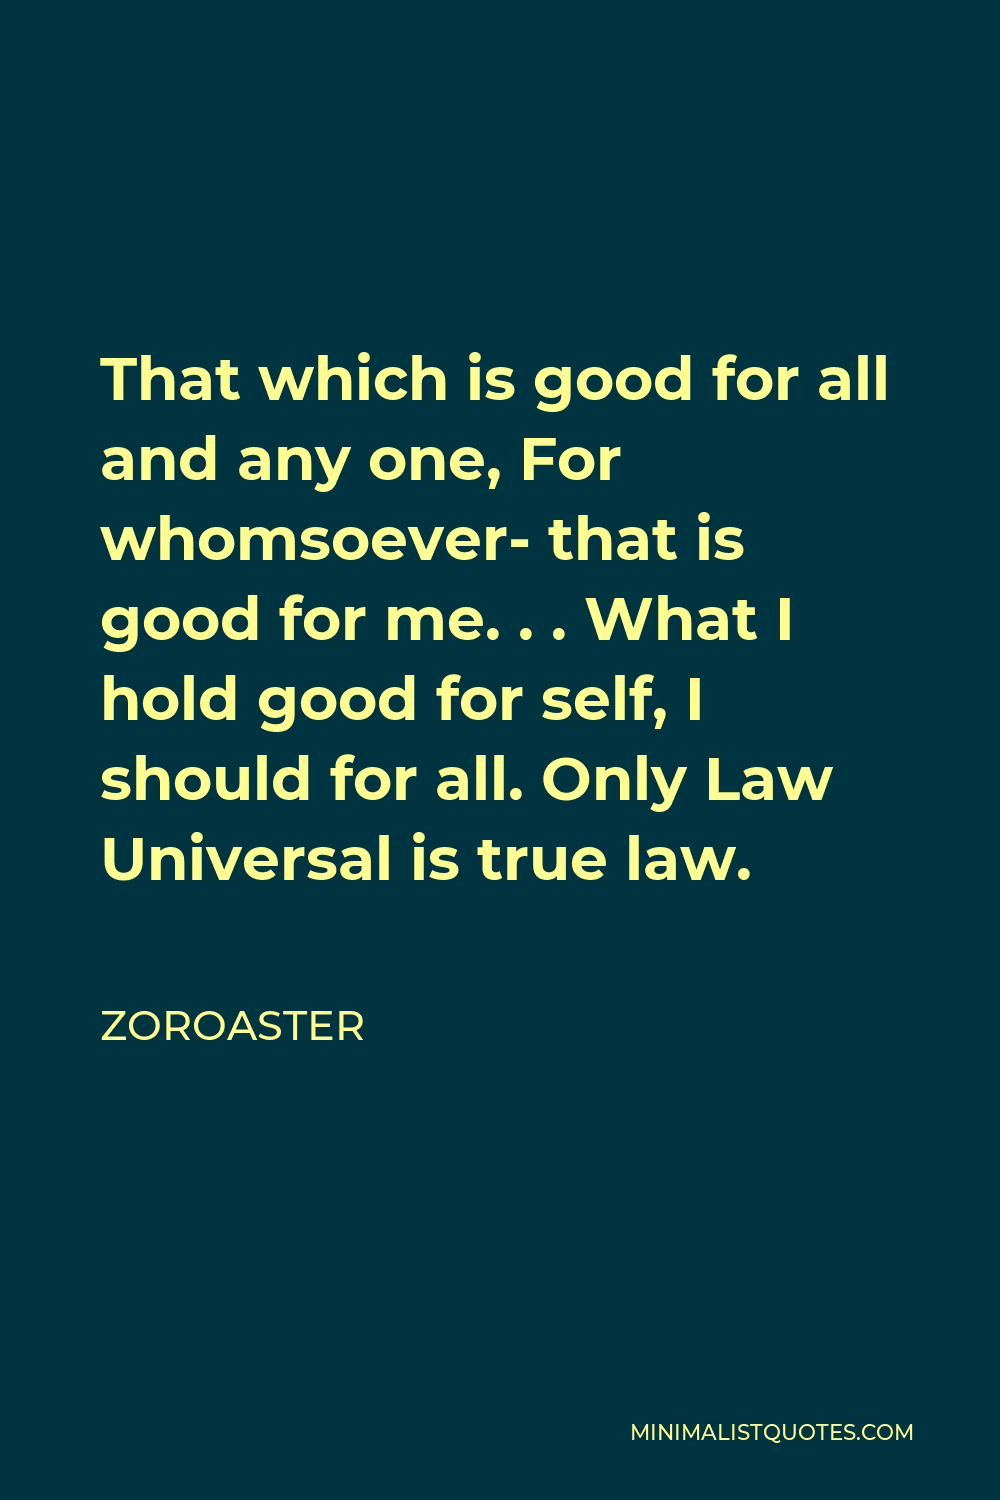 Zoroaster Quote - That which is good for all and any one, For whomsoever- that is good for me. . . What I hold good for self, I should for all. Only Law Universal is true law.